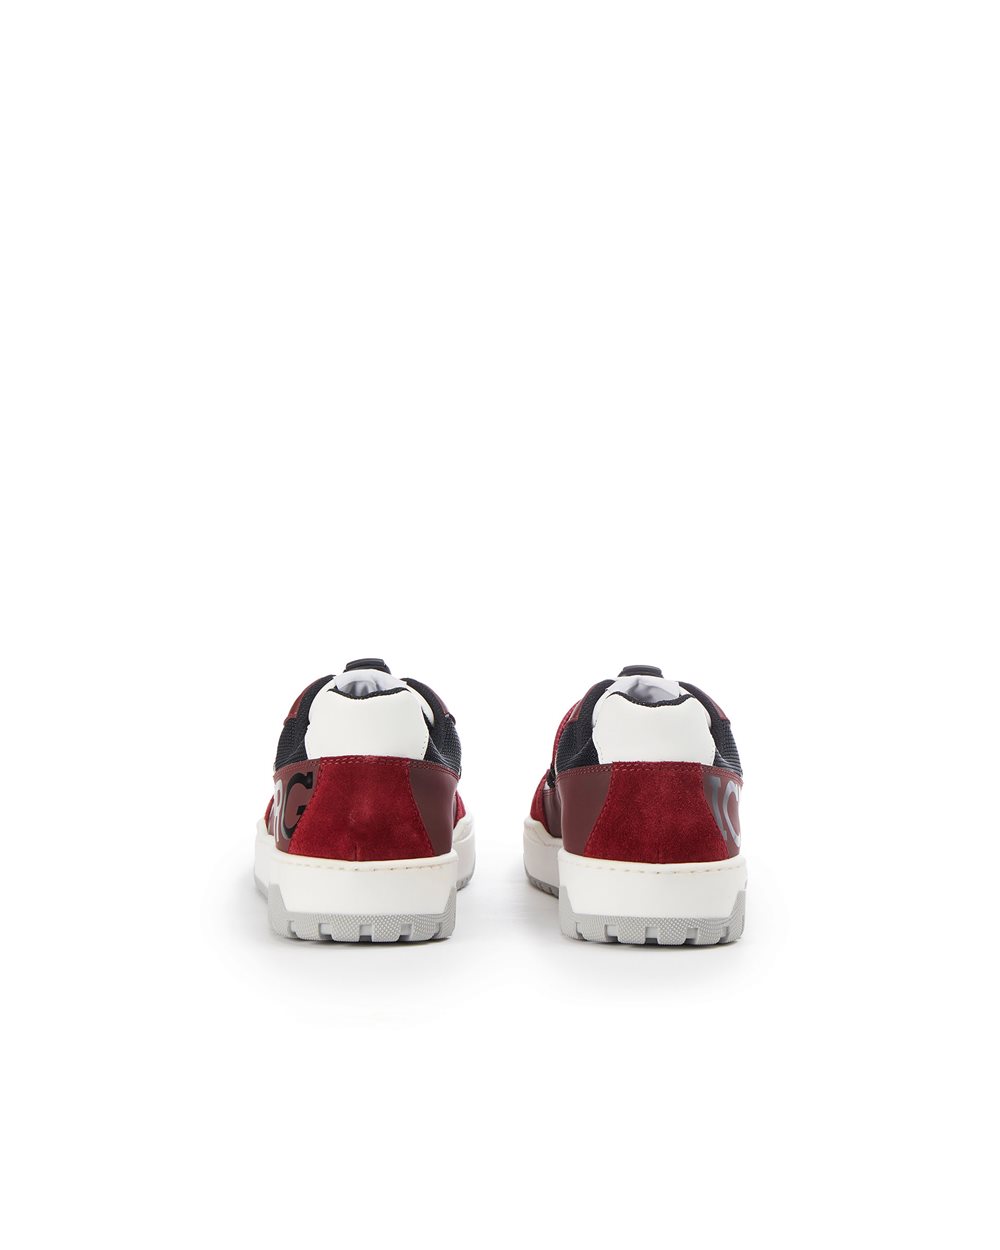 Nabuk and leather Okoro sneakers - Iceberg - Official Website